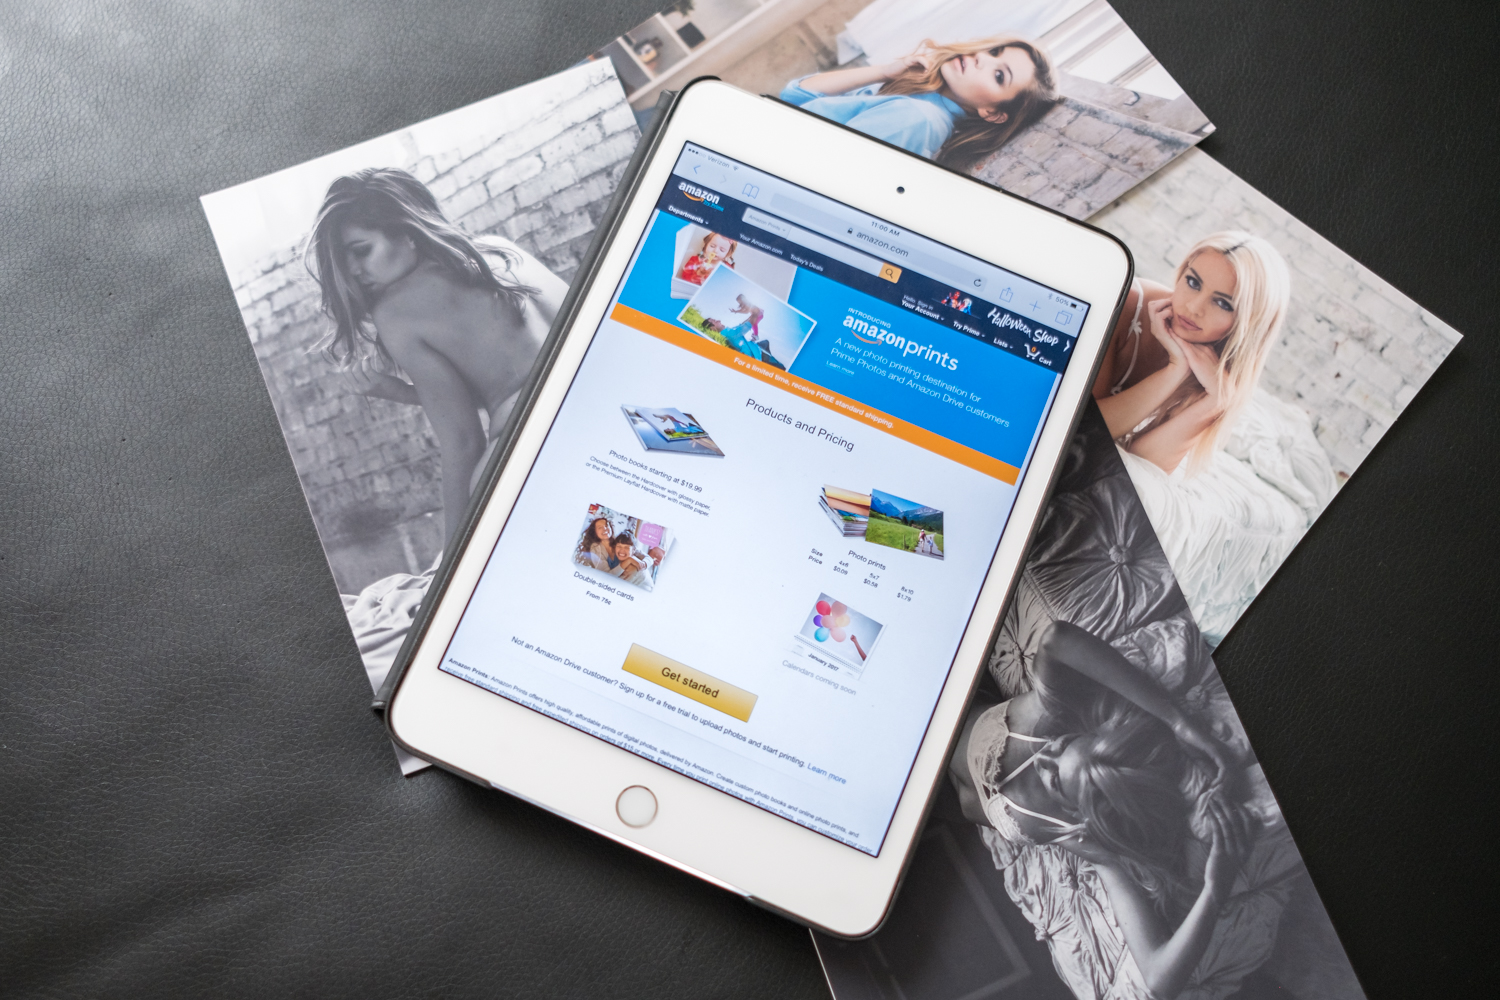 Amazon Debuts Amazon Prints, A High Quality and Affordable Printing Service